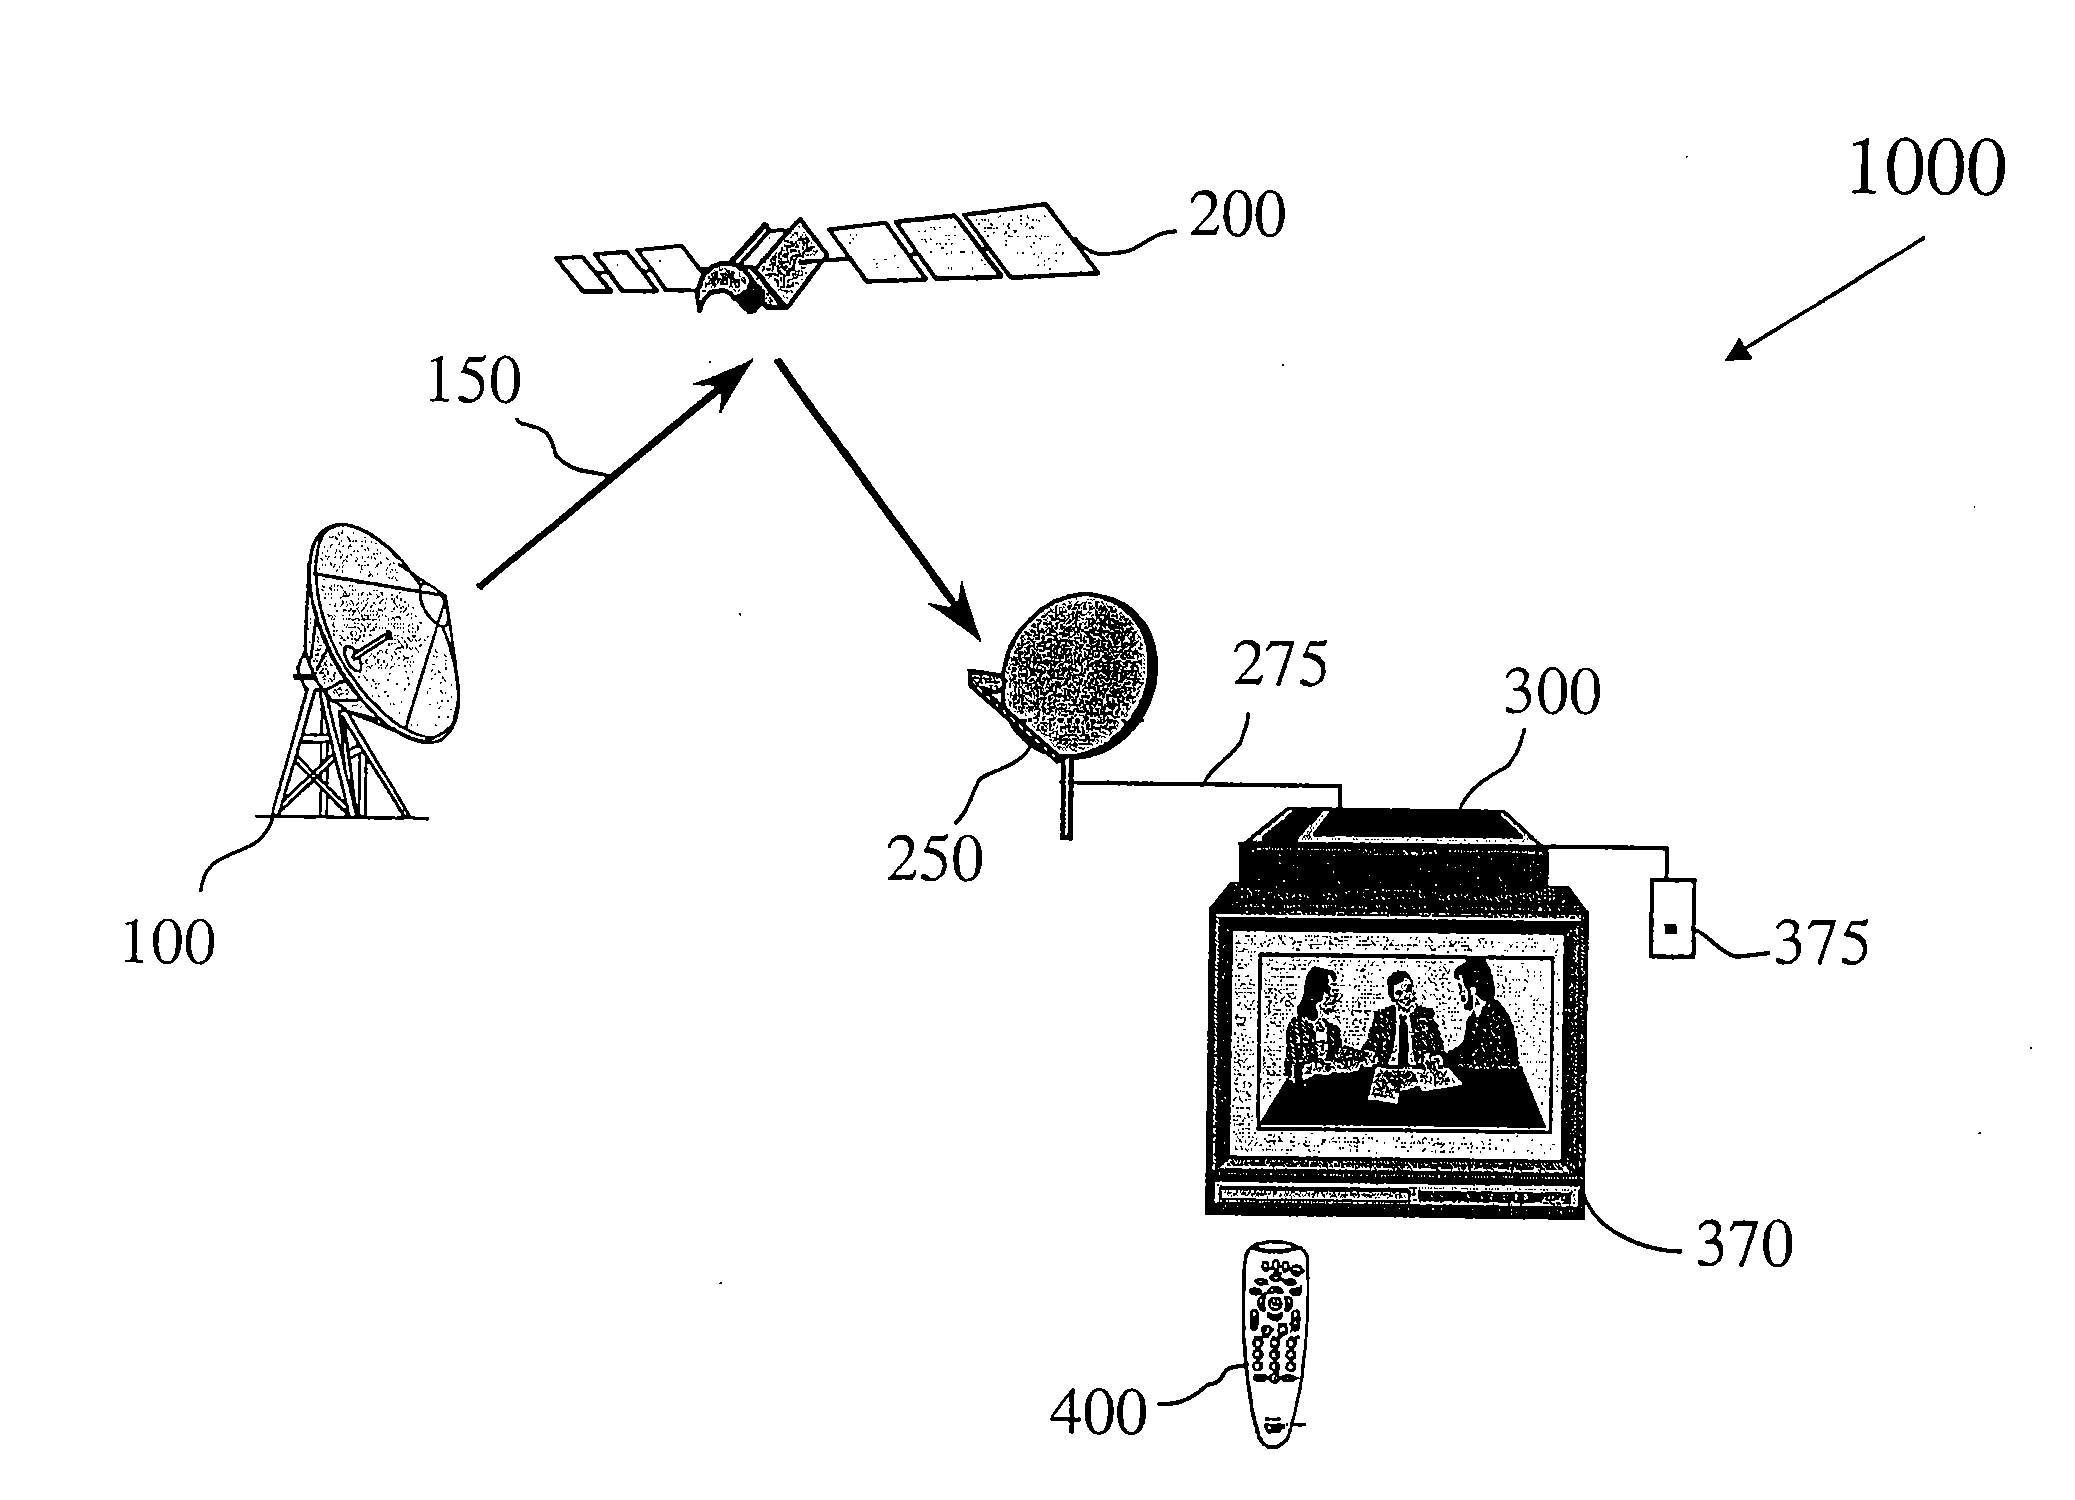 Method and system for electronic program guide temporal content organization